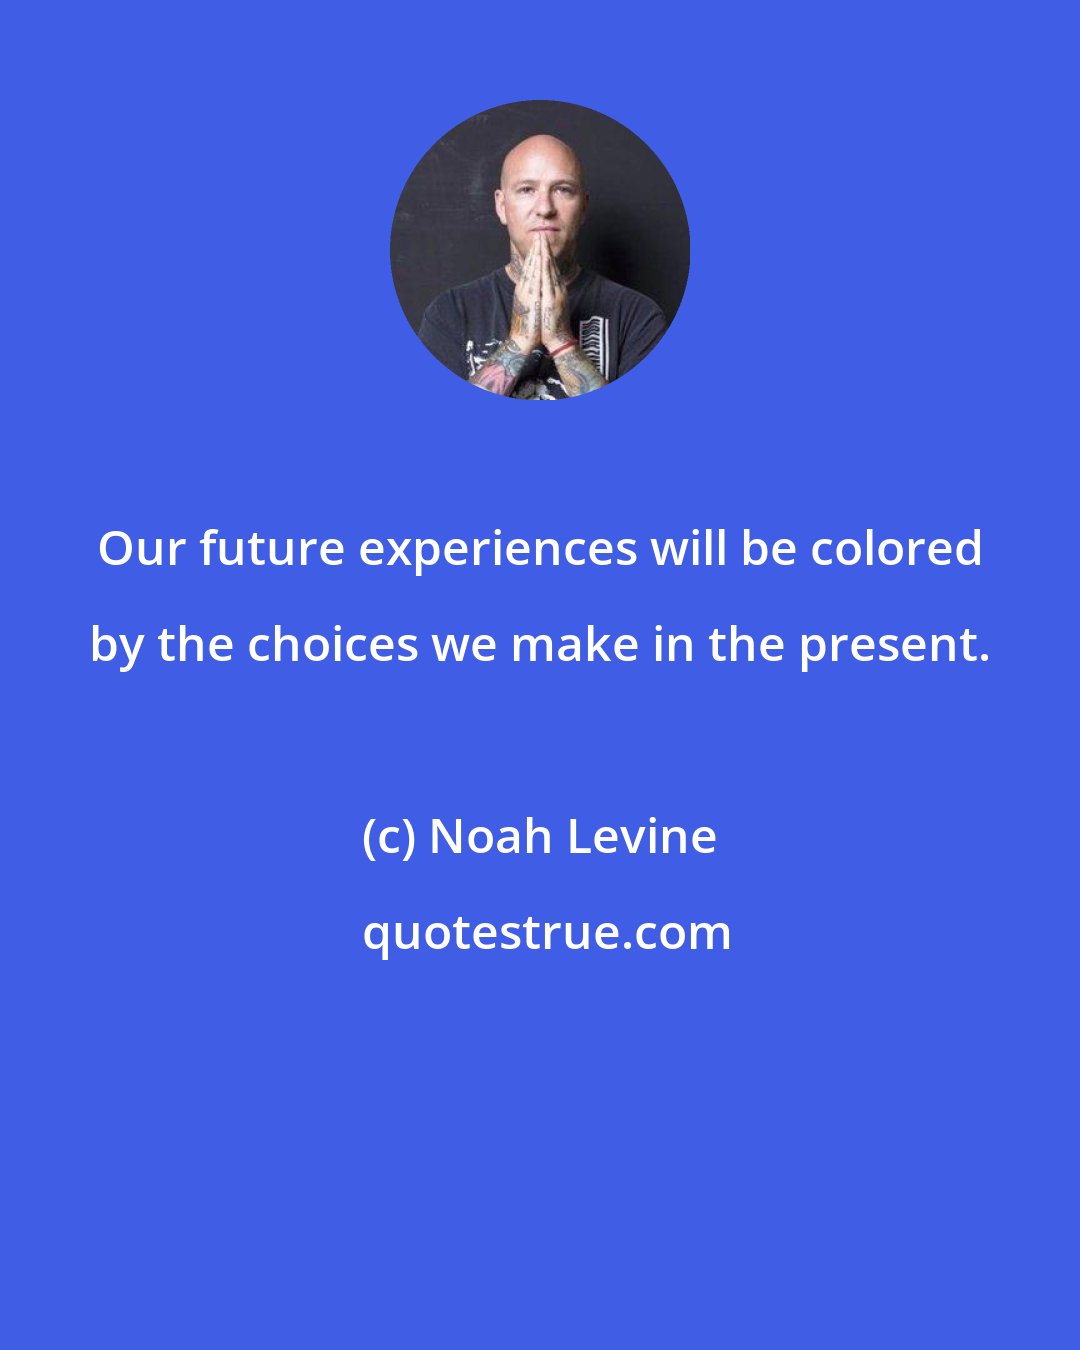 Noah Levine: Our future experiences will be colored by the choices we make in the present.